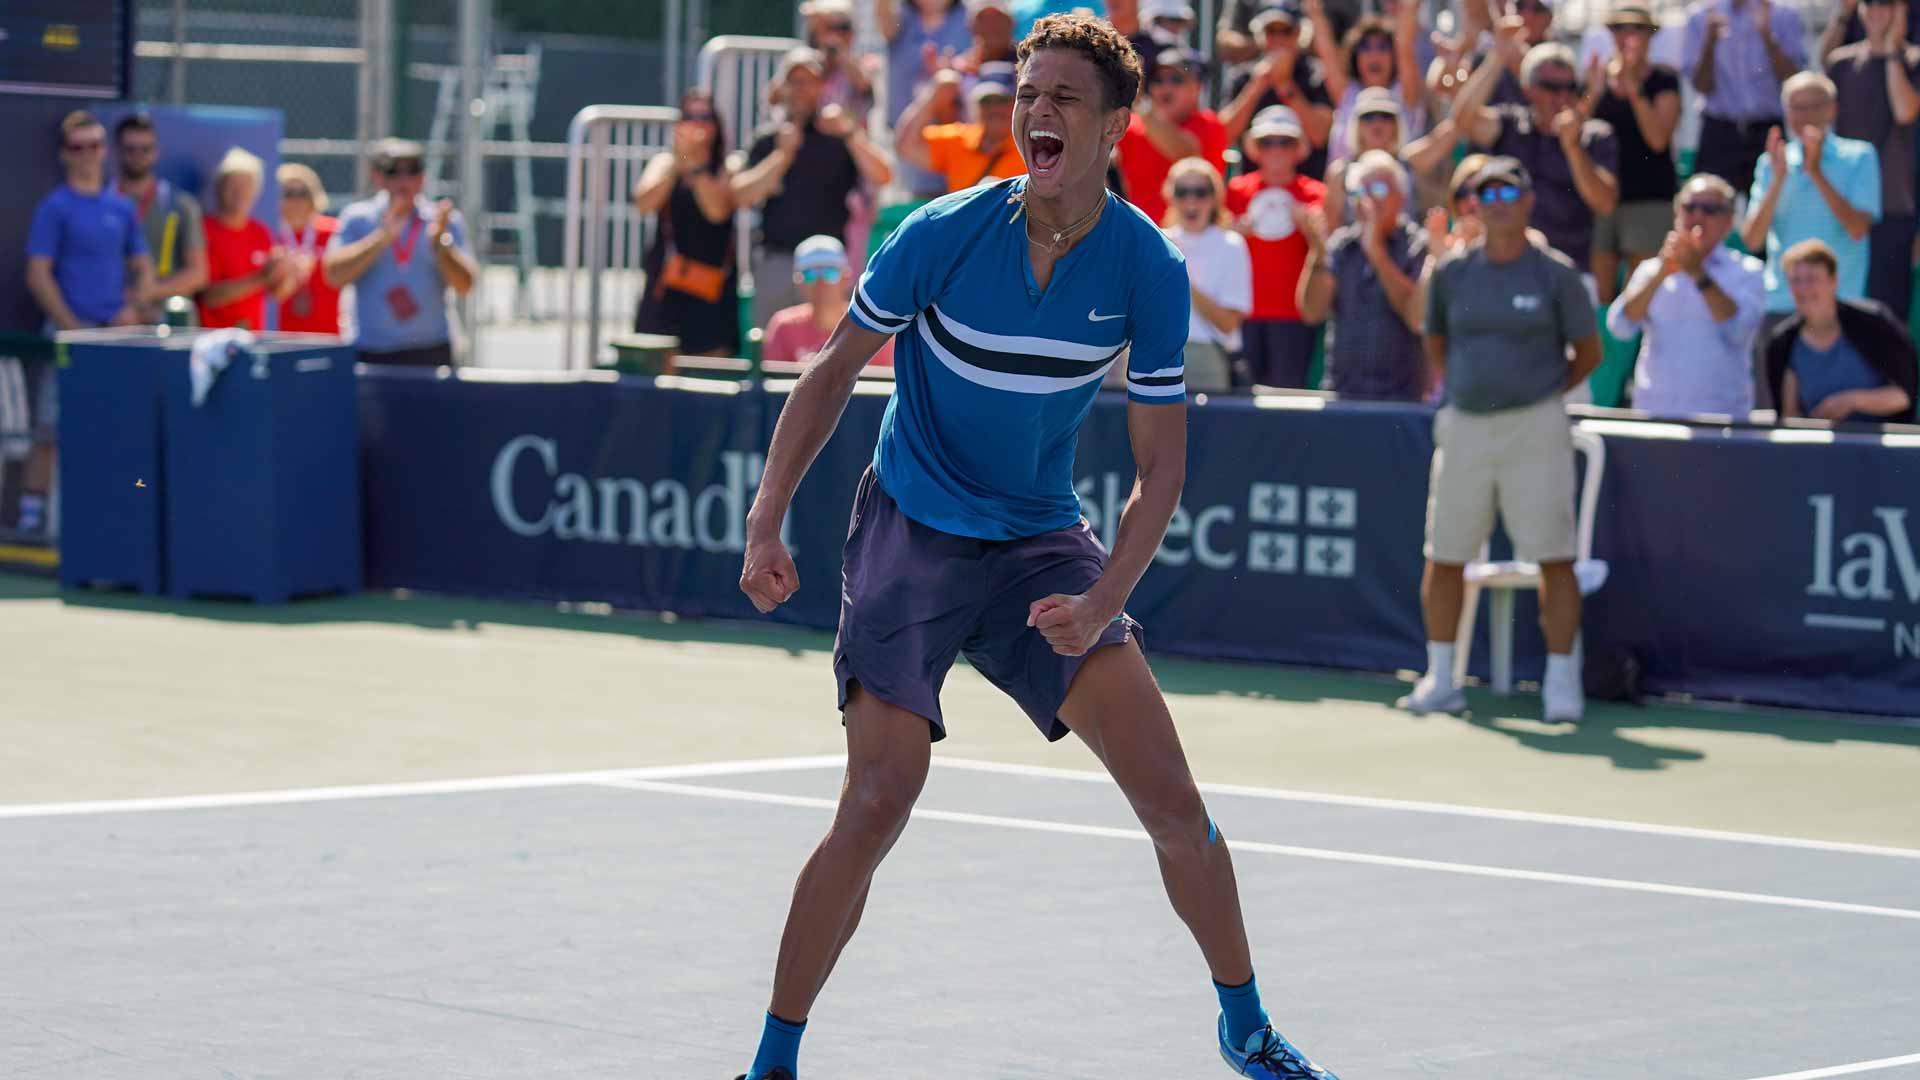 Gabriel Diallo celebrates his first ATP Challenger Tour title in Granby, Canada.